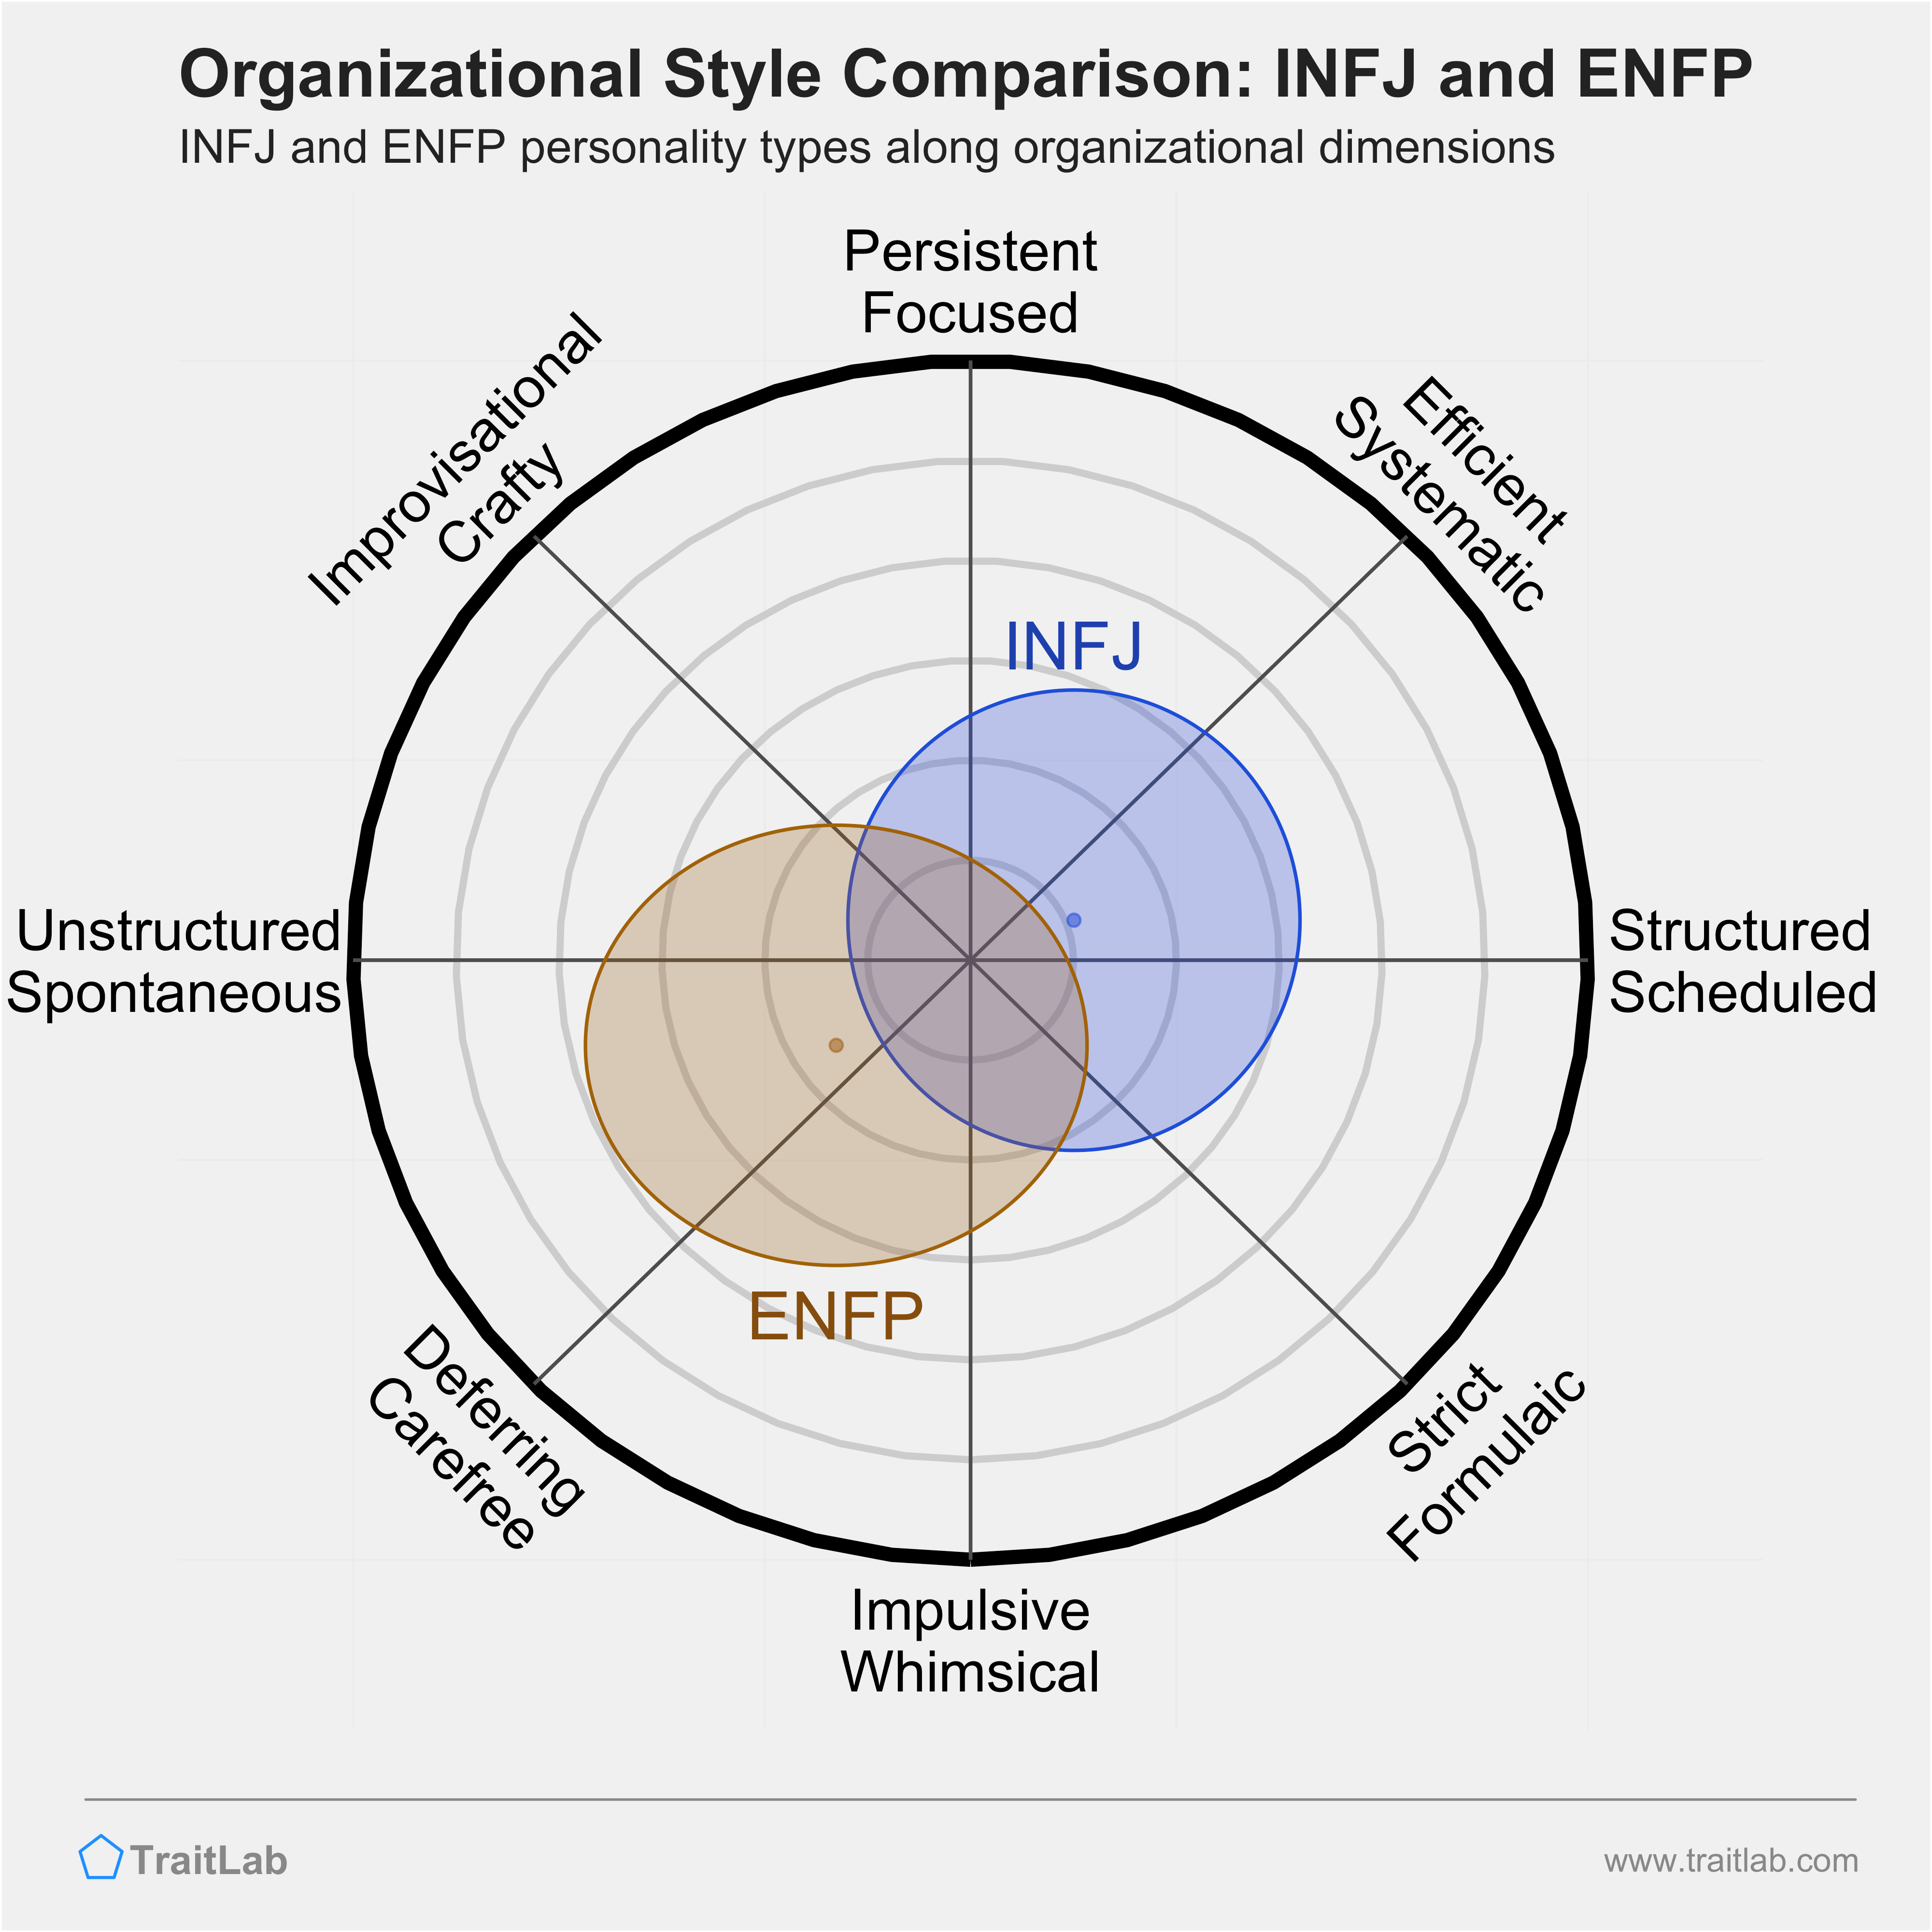 INFJ and ENFP comparison across organizational dimensions